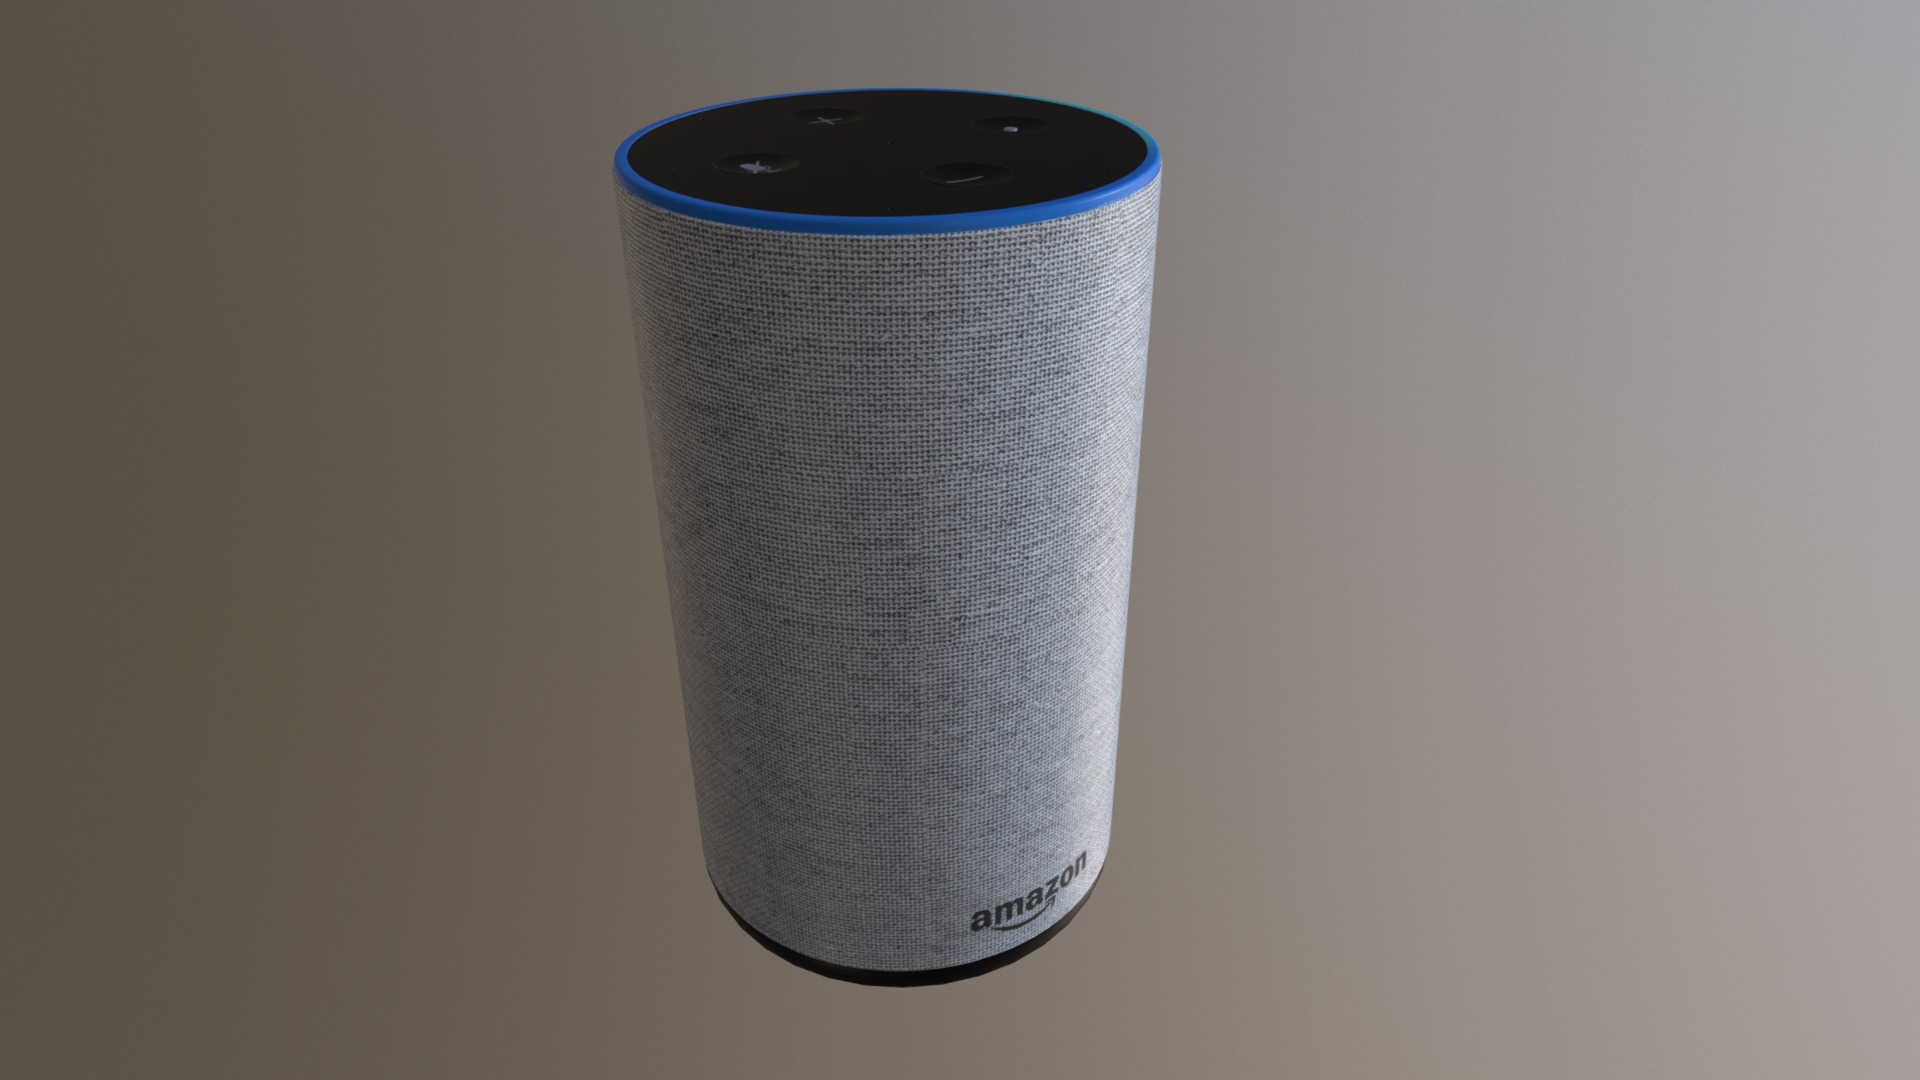 3D model Amazon echo White - This is a 3D model of the Amazon echo White. The 3D model is about a cylindrical object with a blue top.